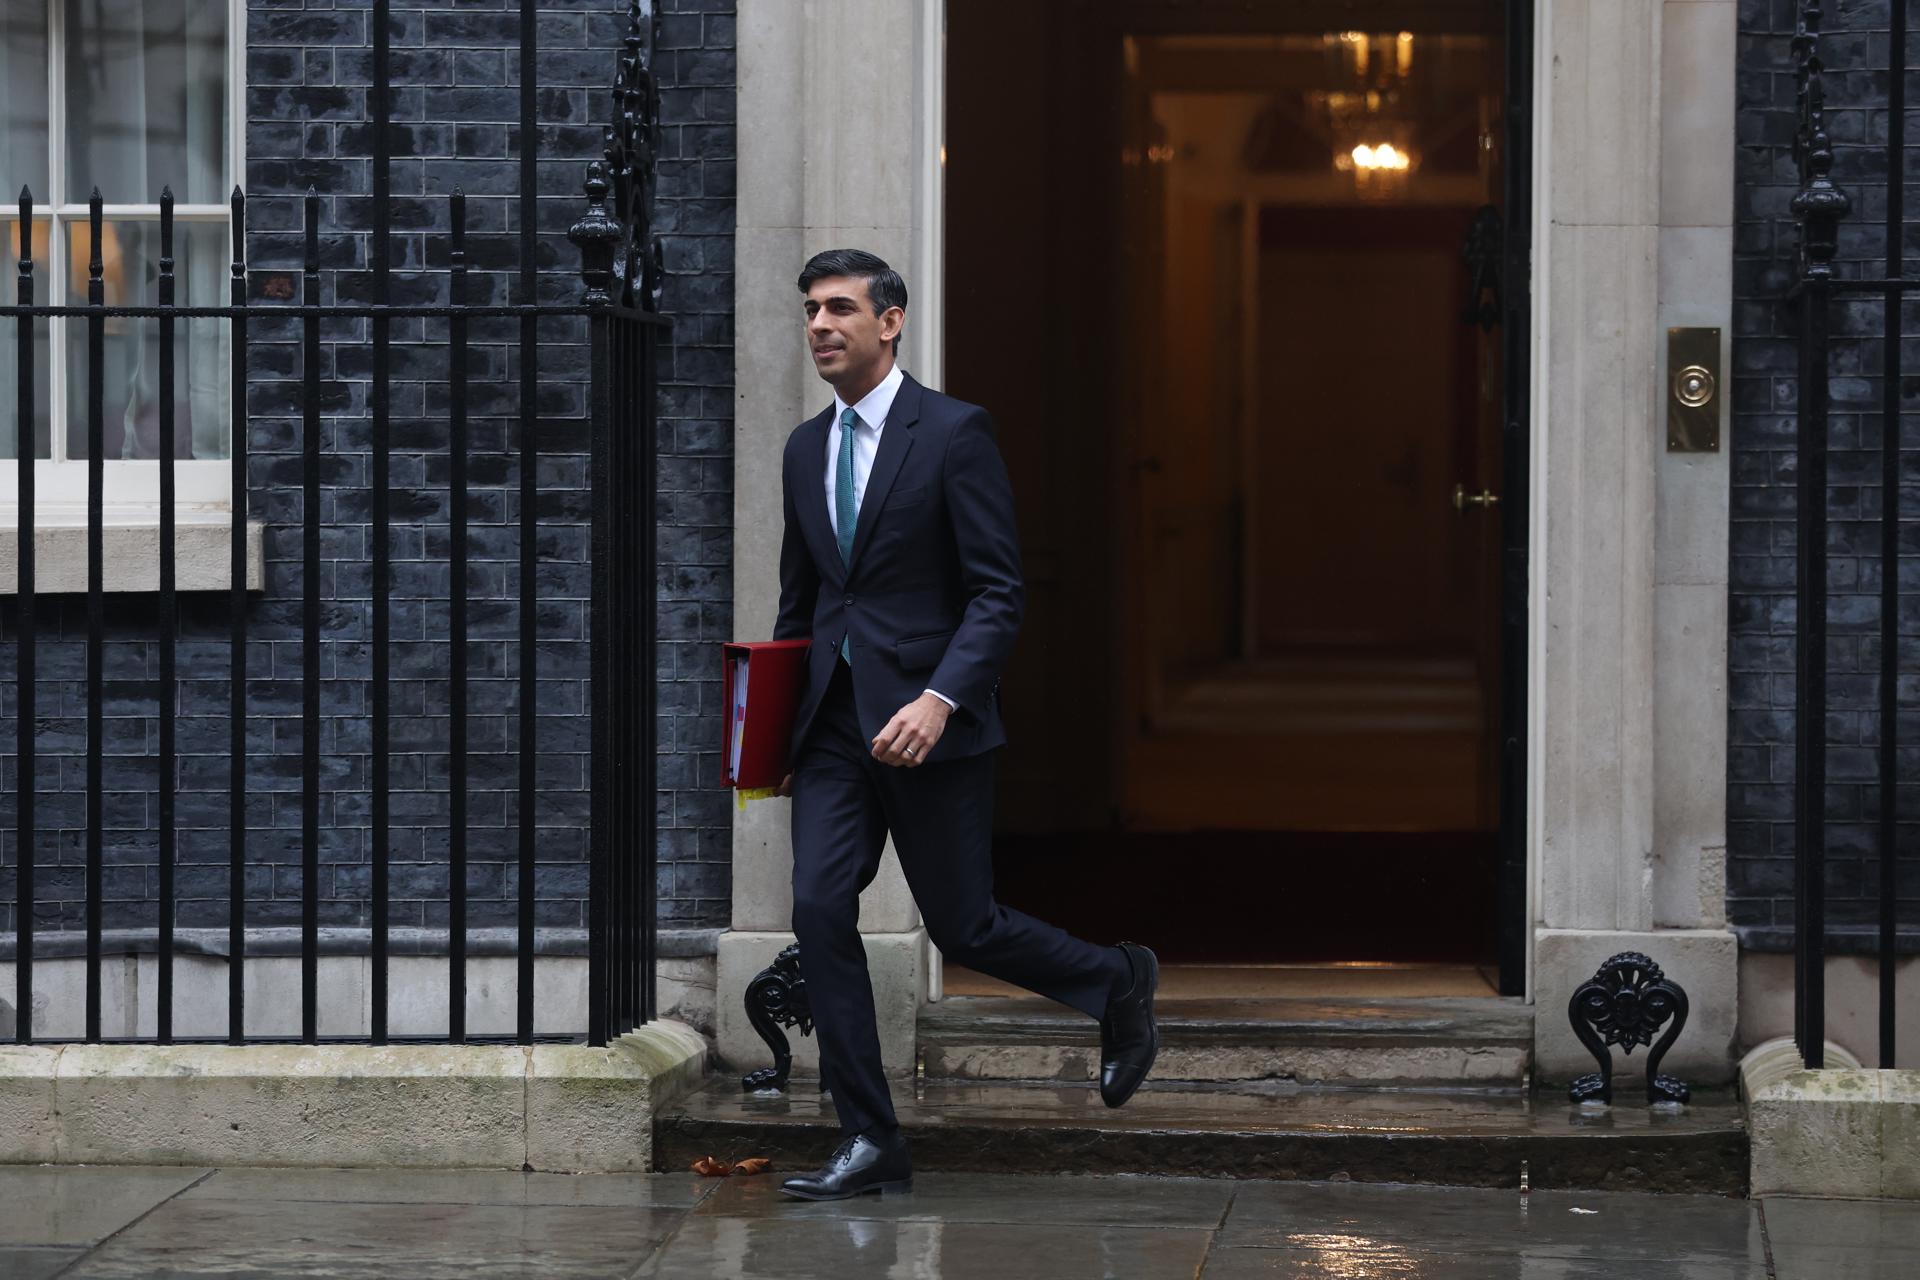 British Prime Minister Rishi Sunak departs his official residence at 10 Downing Street to appear at Prime Minister's Questions (PMQs) at Parliament in London, Britain, 08 March 2023. EFE/EPA/ISABEL INFANTES